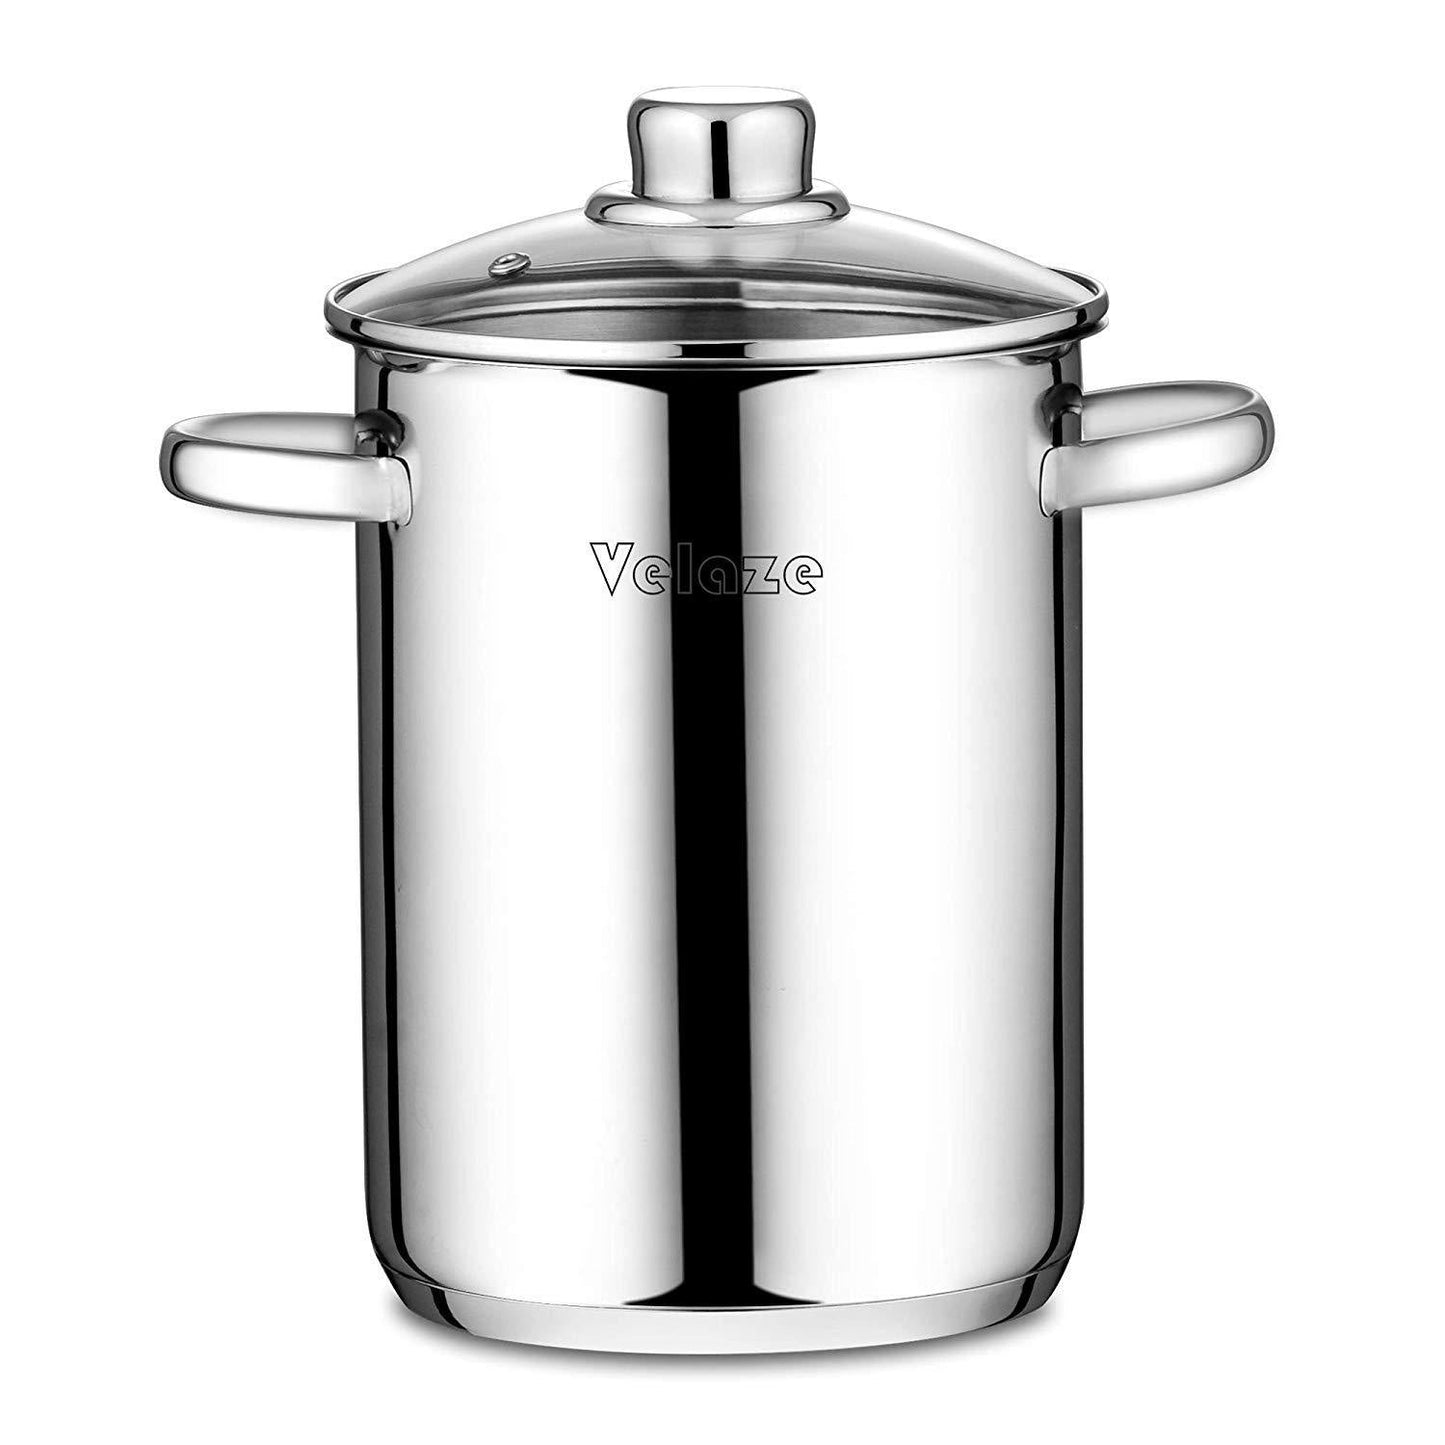 Asparagus Pot Stainless Steel 4L Vegetable Asparagus Steamer Pot with Basket and Lid Pasta Pot Stovetop Steamer Cooker - Nordic Side - and, Asparagus, Basket, Cooker, Lid, Pasta, Pot, Stainle